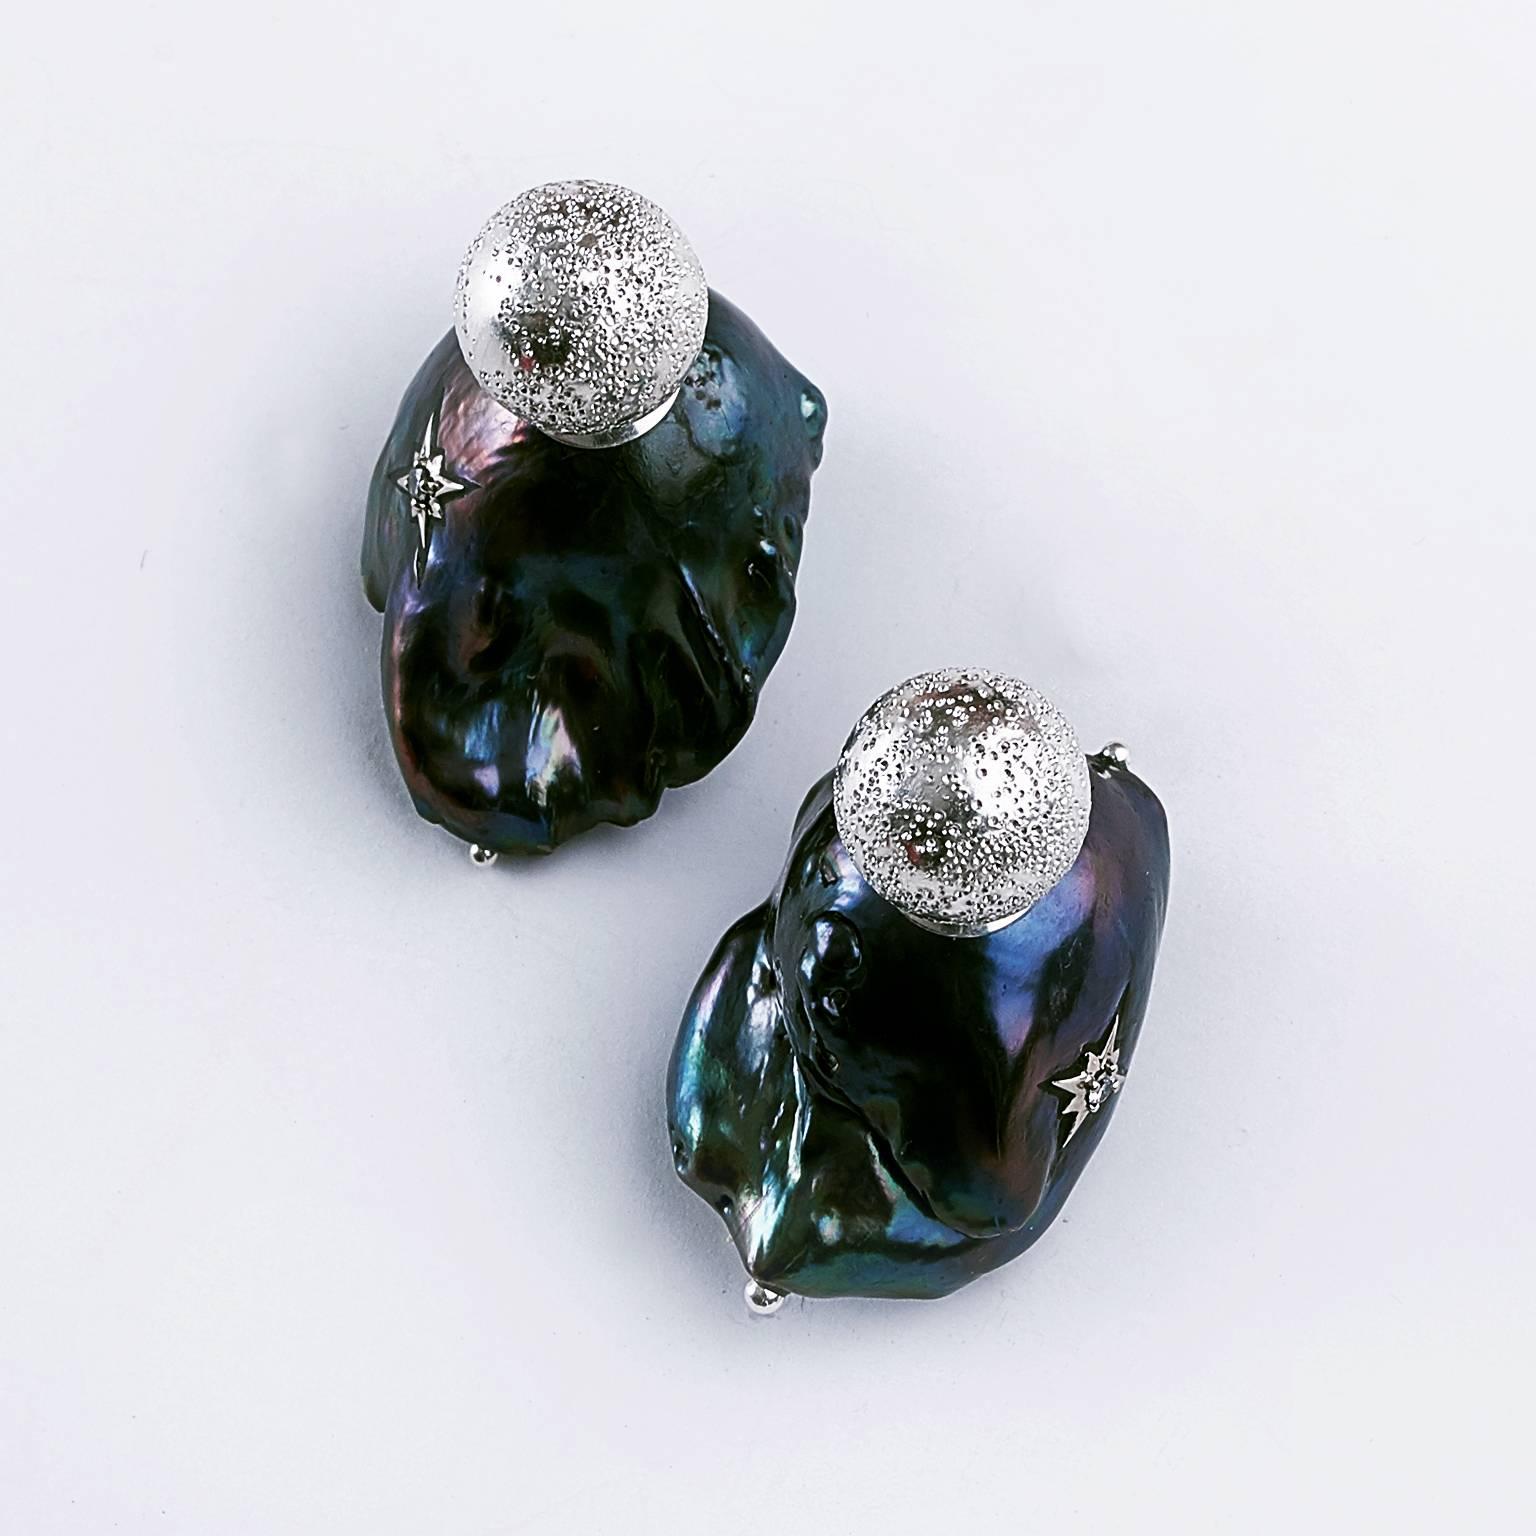 This black baroque cultured massive pearls that made up stud earring. On front sides with 12 mm diamond dust sterling silver beads.
The natural formed freshwater pearl earrings measurement detail  is  28.51 x 20.69 mm ( 1.12 x 0.81 in ), 29.22 x